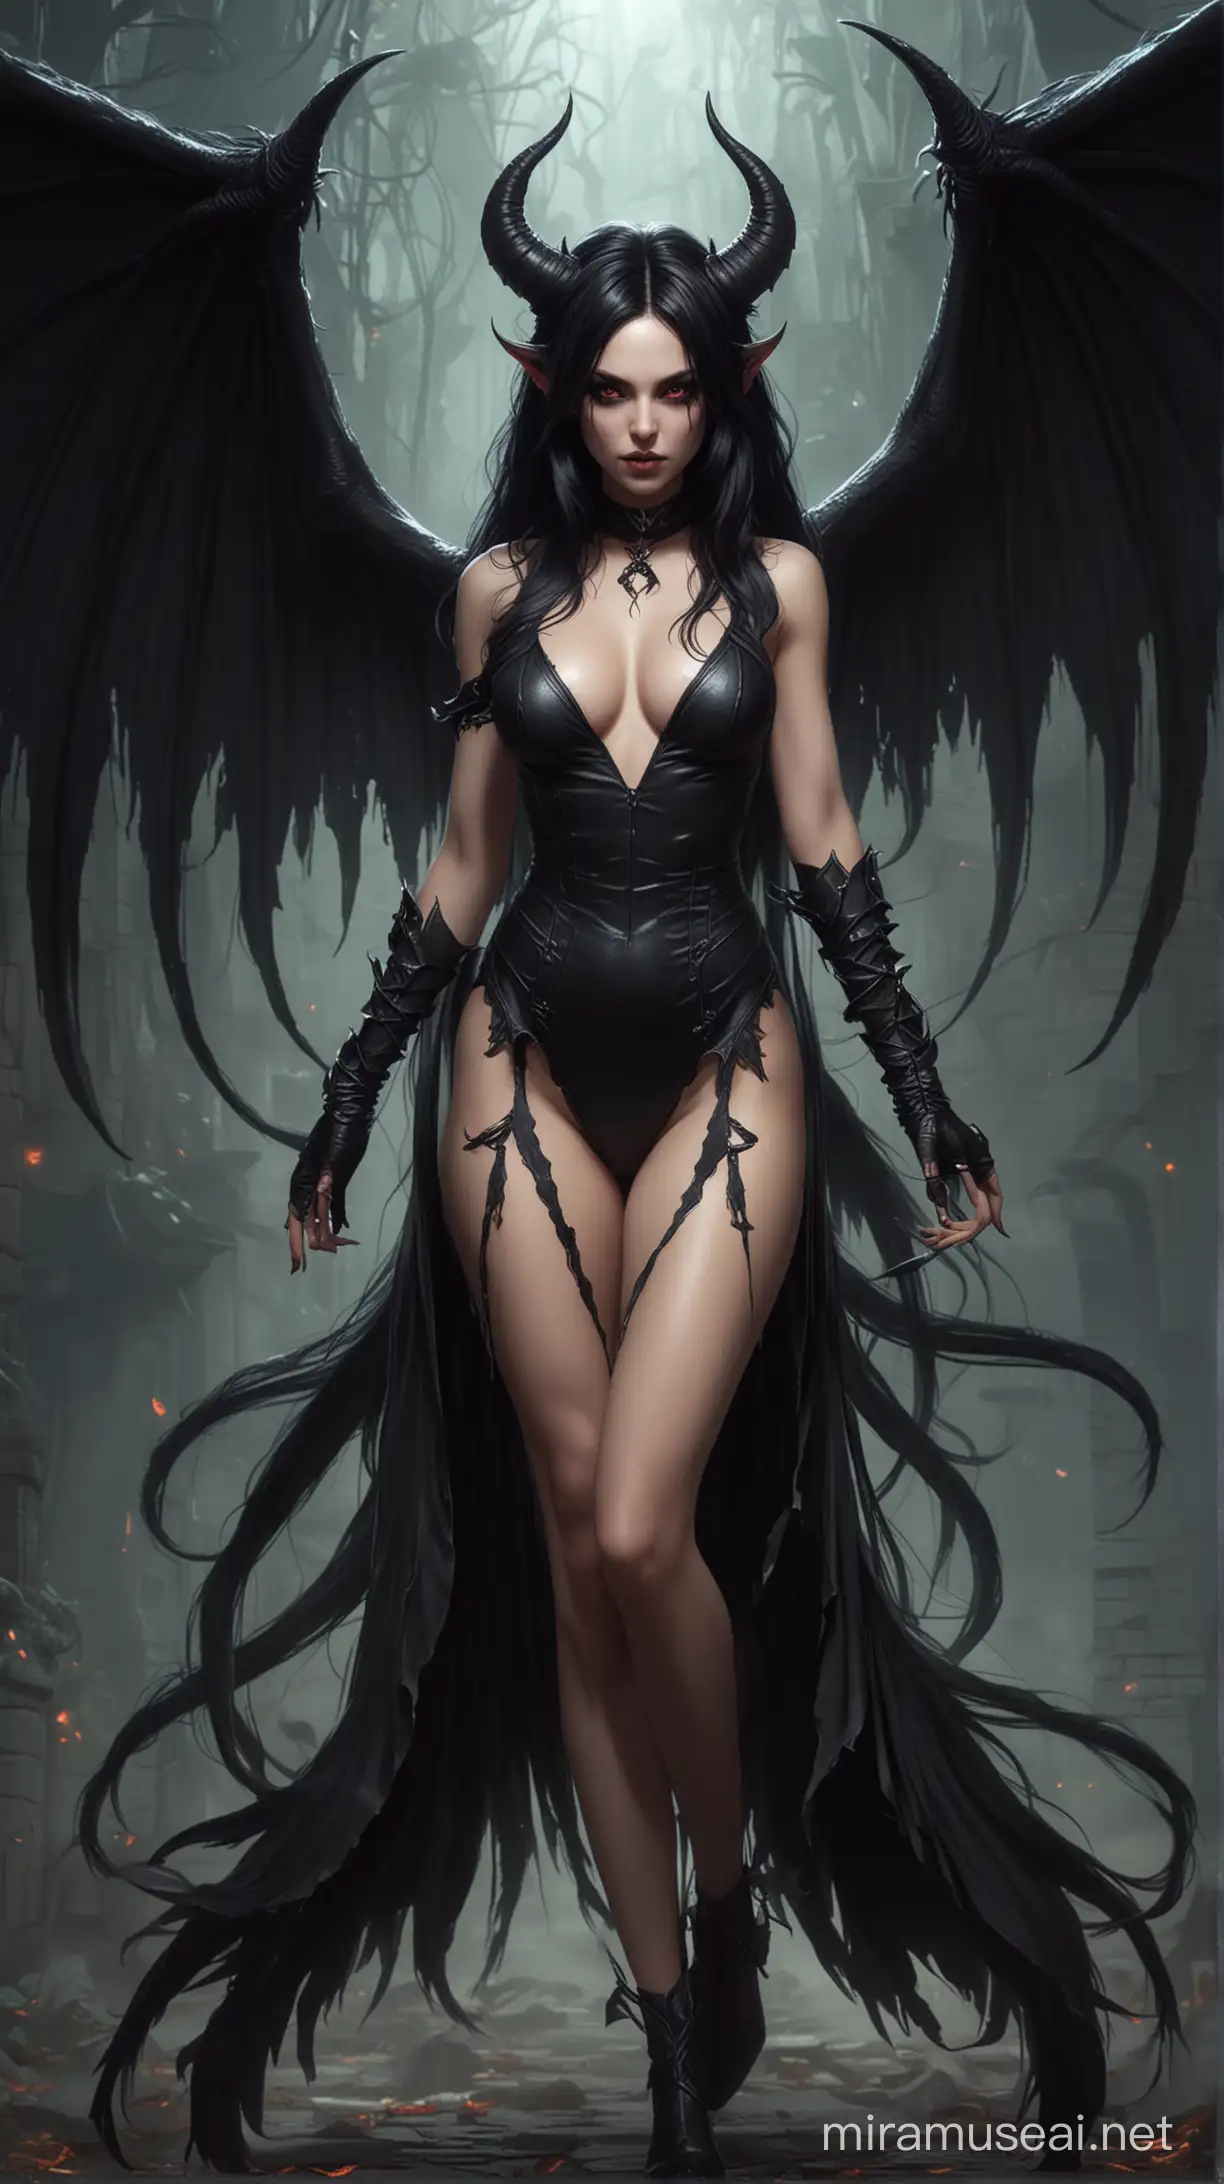 Seductive Succubus with Flowing Black Hair Wings and Demon Features